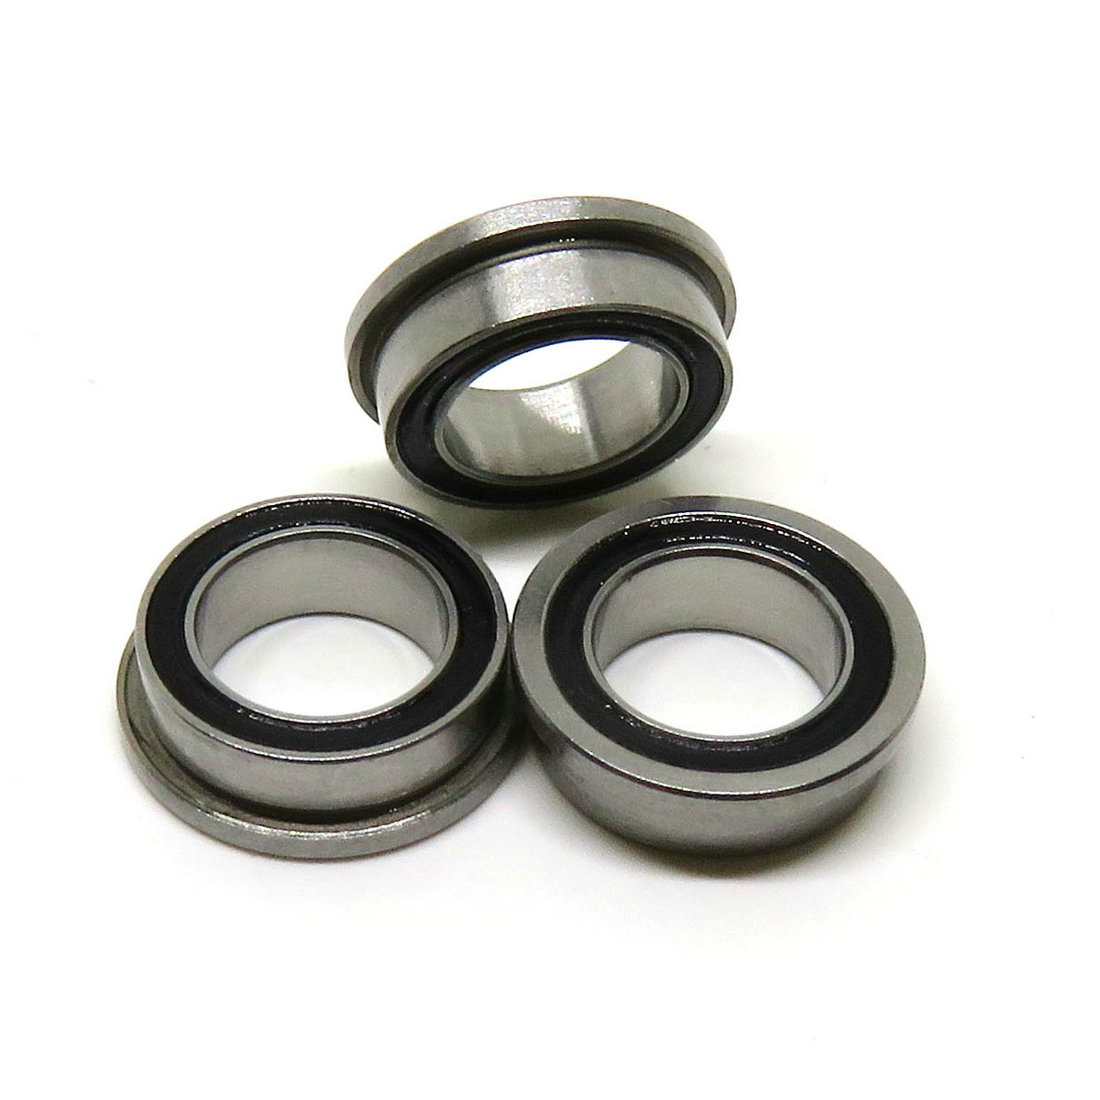 Rubber Sealed Stainless Steel Flanged Bearing SMF52 SMF62 SMF2 SMF63 SMF83 SMF93 SMF74 SMF84 SMF104 SMF85 SMF95 SMF105 SMF115 SMF106 SMF117 SMF128 SMF148-2RS.jpg